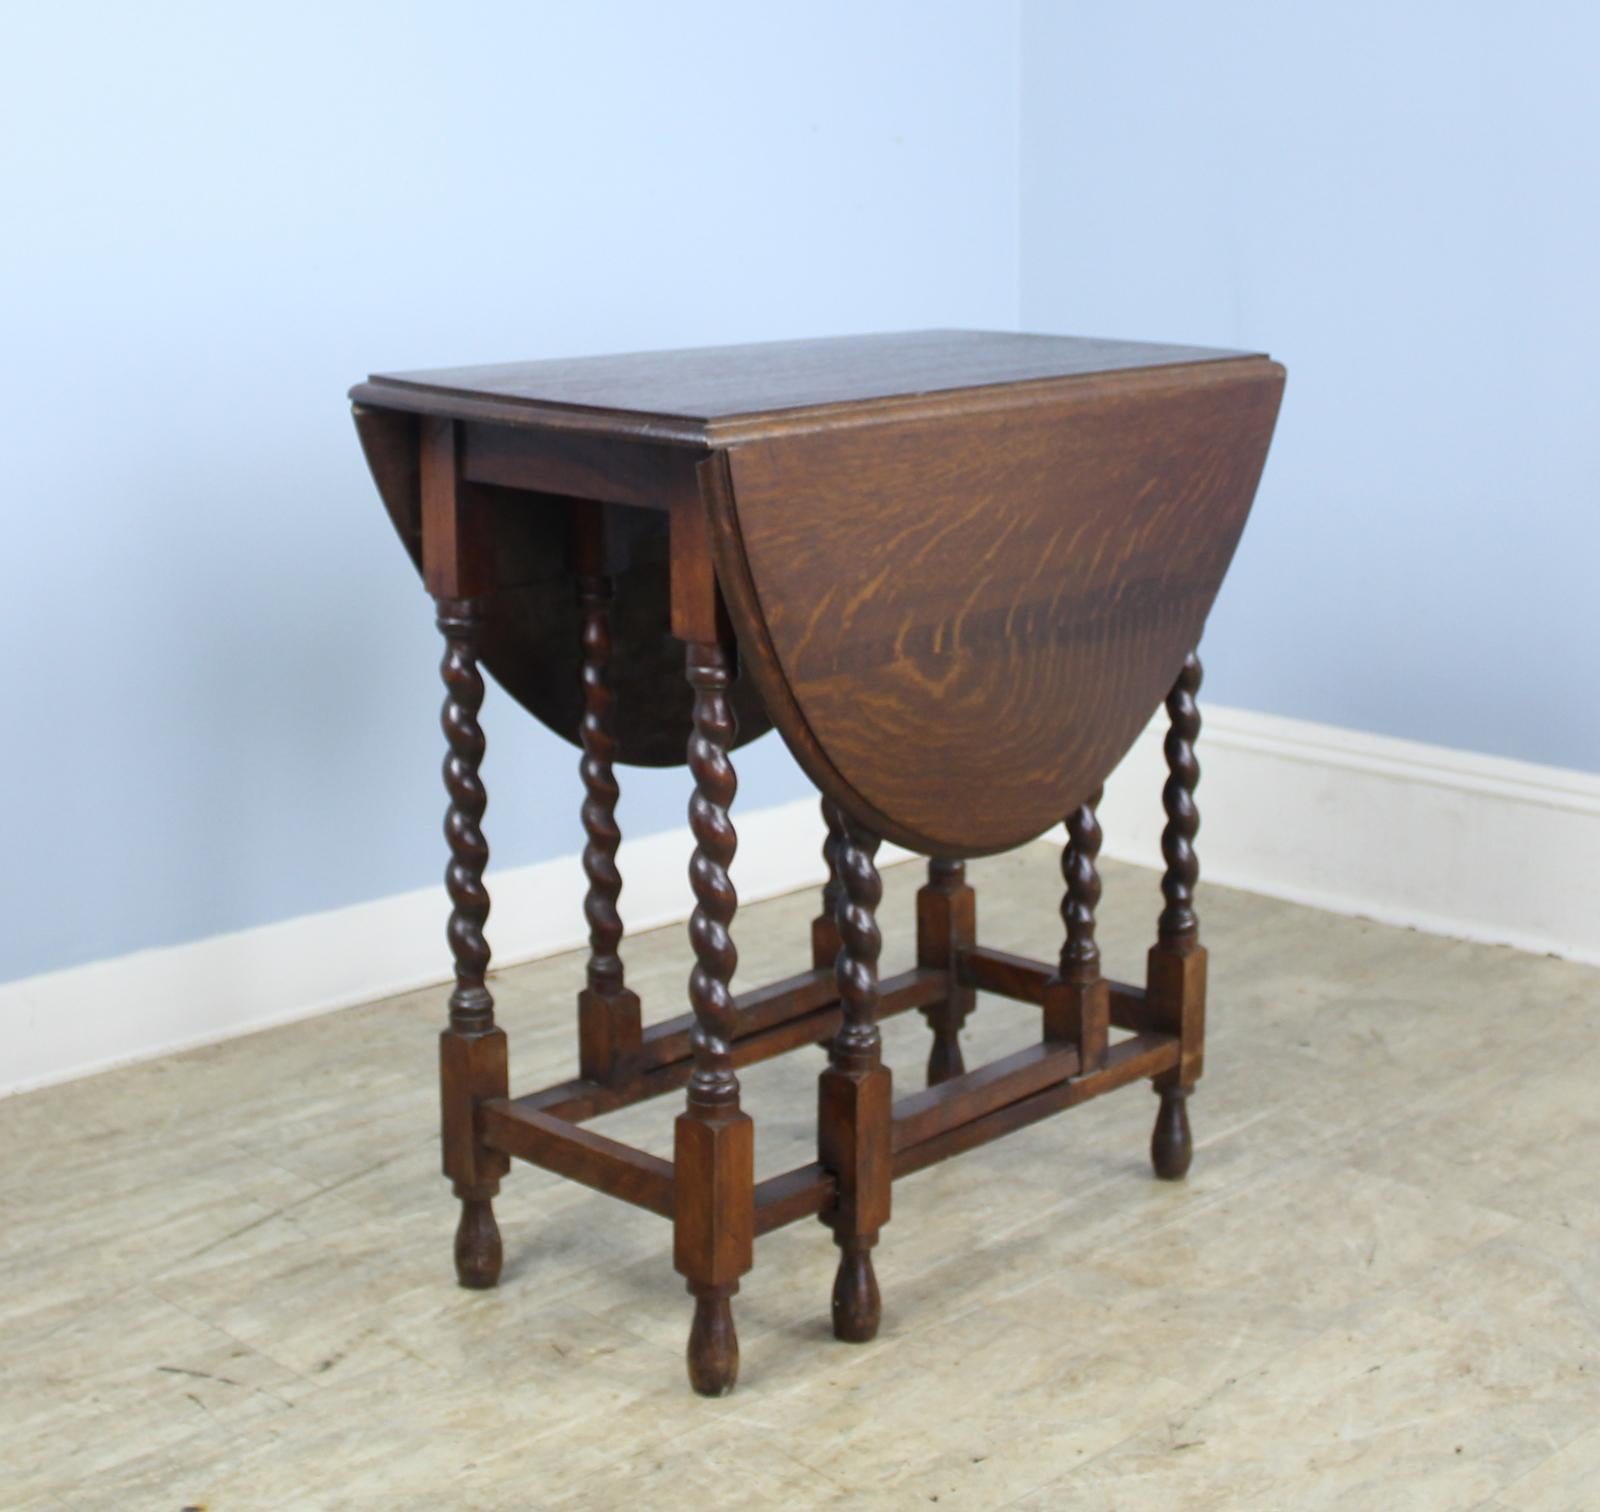 This is an excellent example of the classic. It is a smaller size, suitable as a small breakfast table, fine for a tea table. Good dark color and nice patina; turnings are eye catching. It is appropriate as a side, lamp or end table. Additionally,